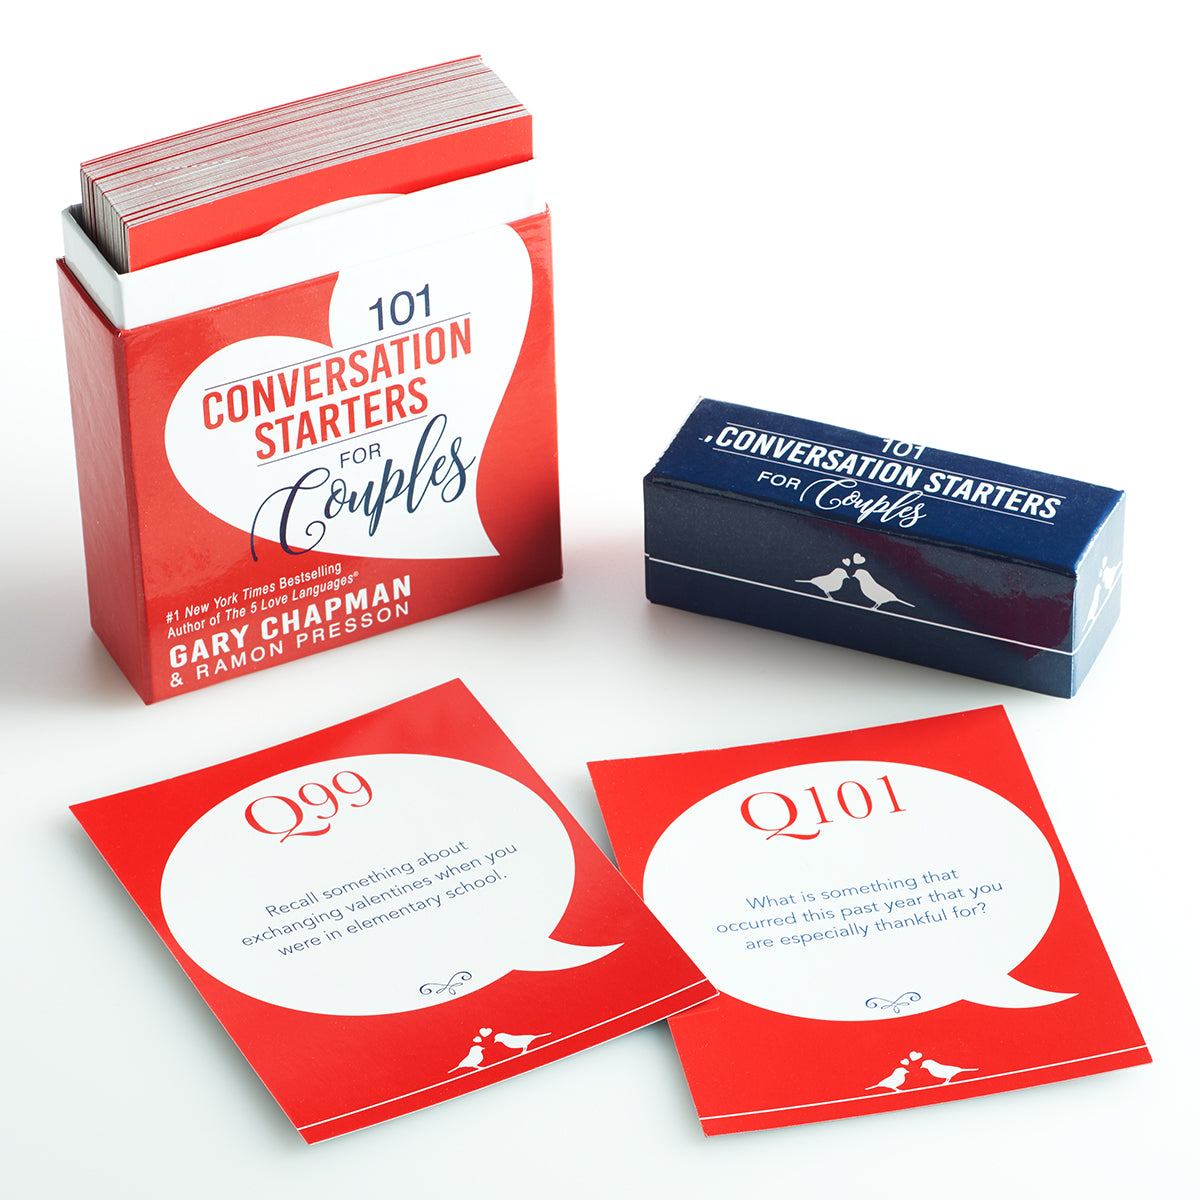 101 Conversation Starters for Couples - The Christian Gift Company